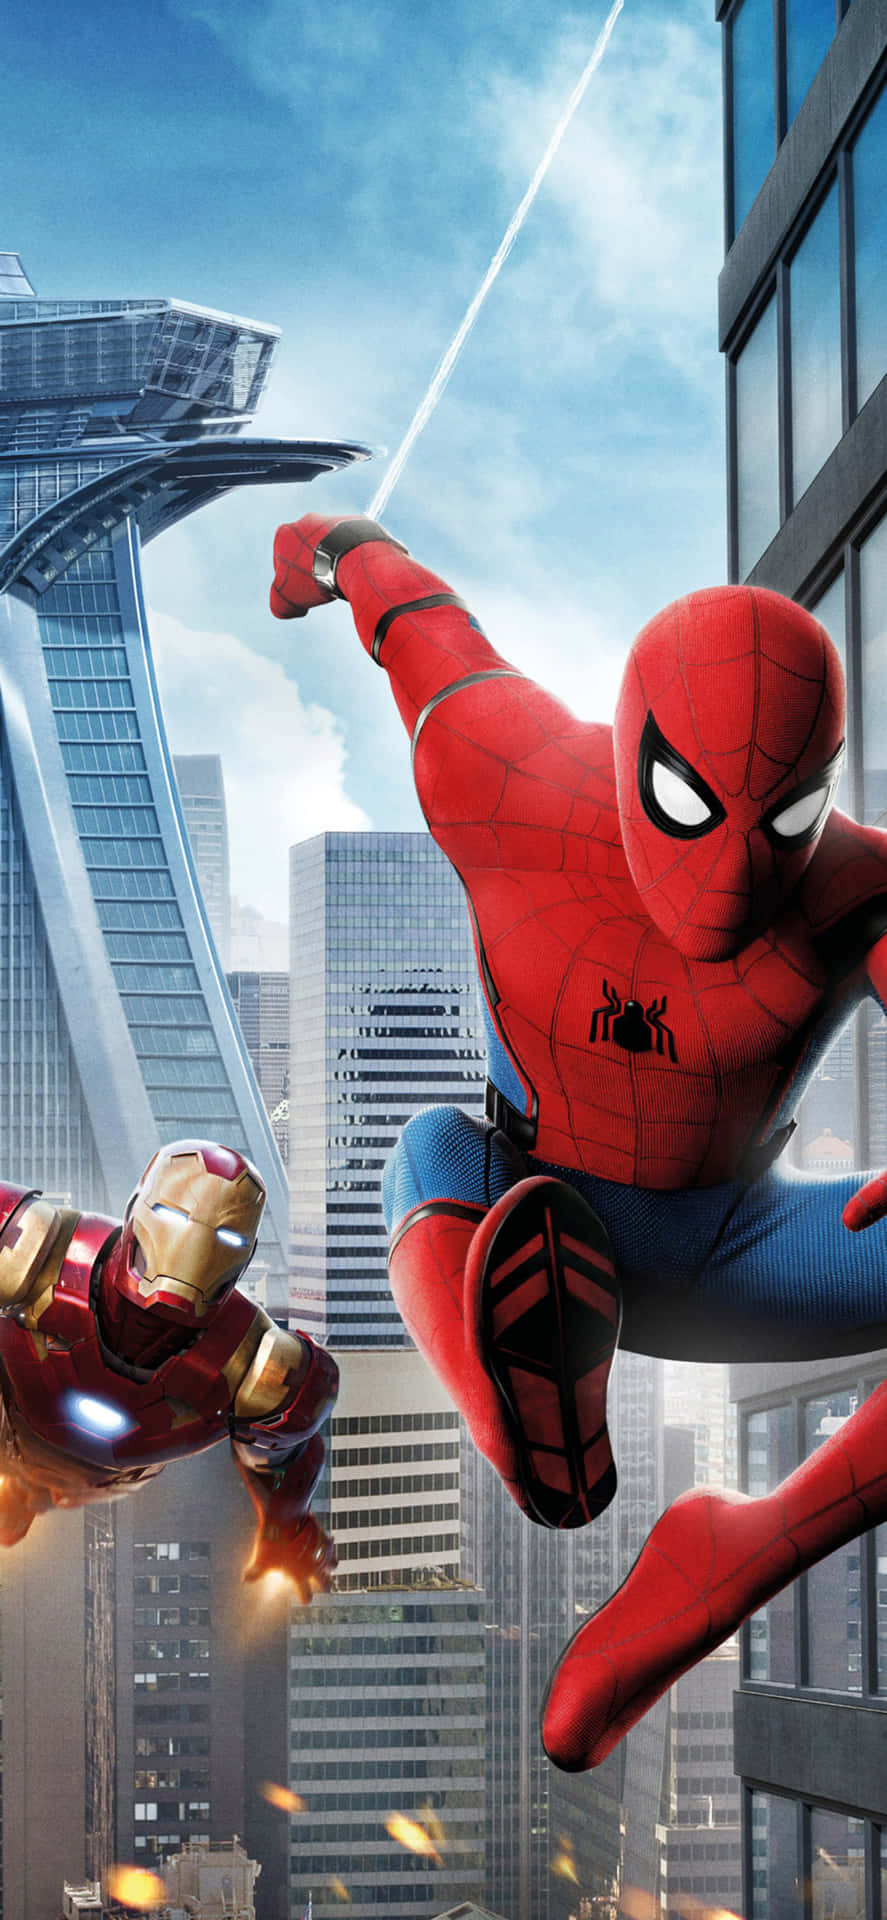 Spider-Man and Iron Man Team Up for Battle Wallpaper